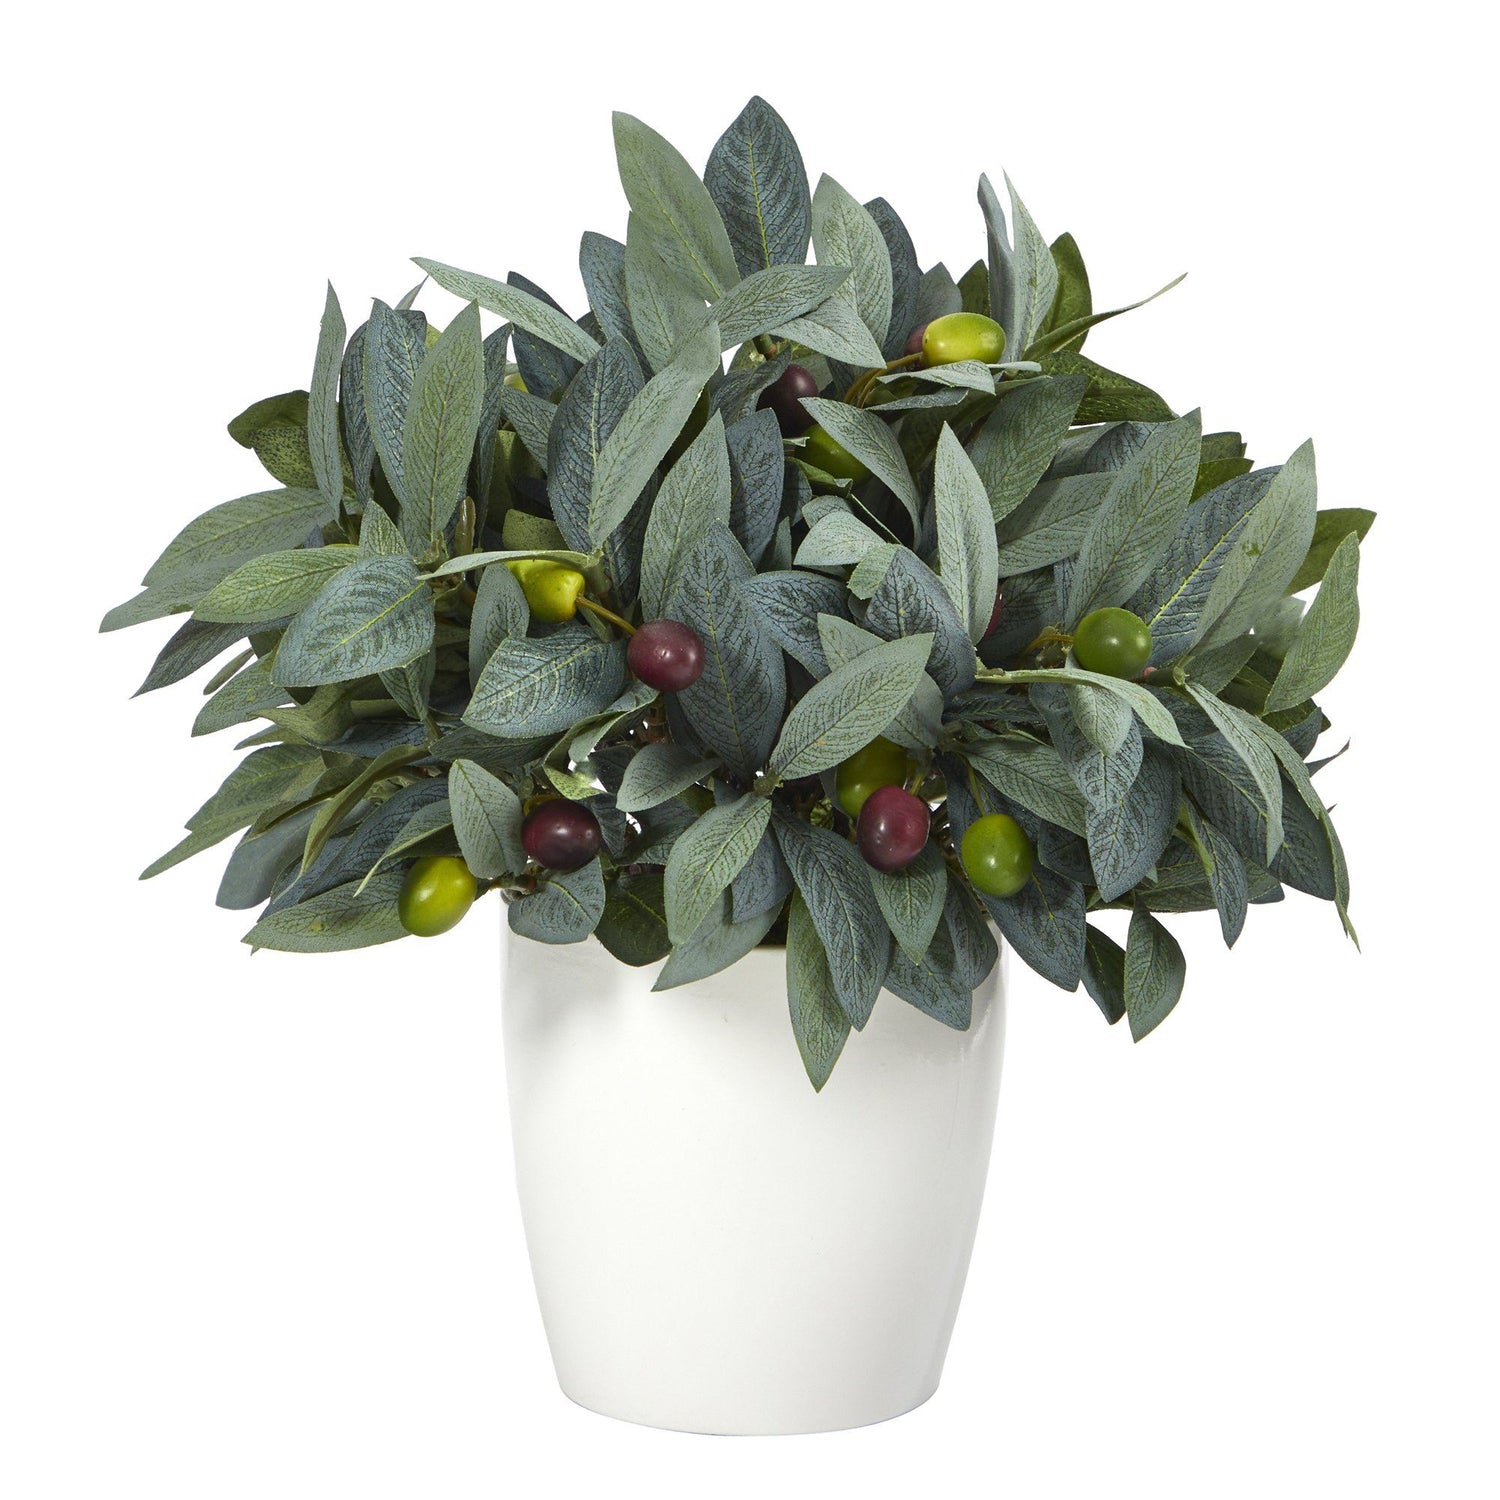 10” Olive Artificial Plant with Berries in White Planter